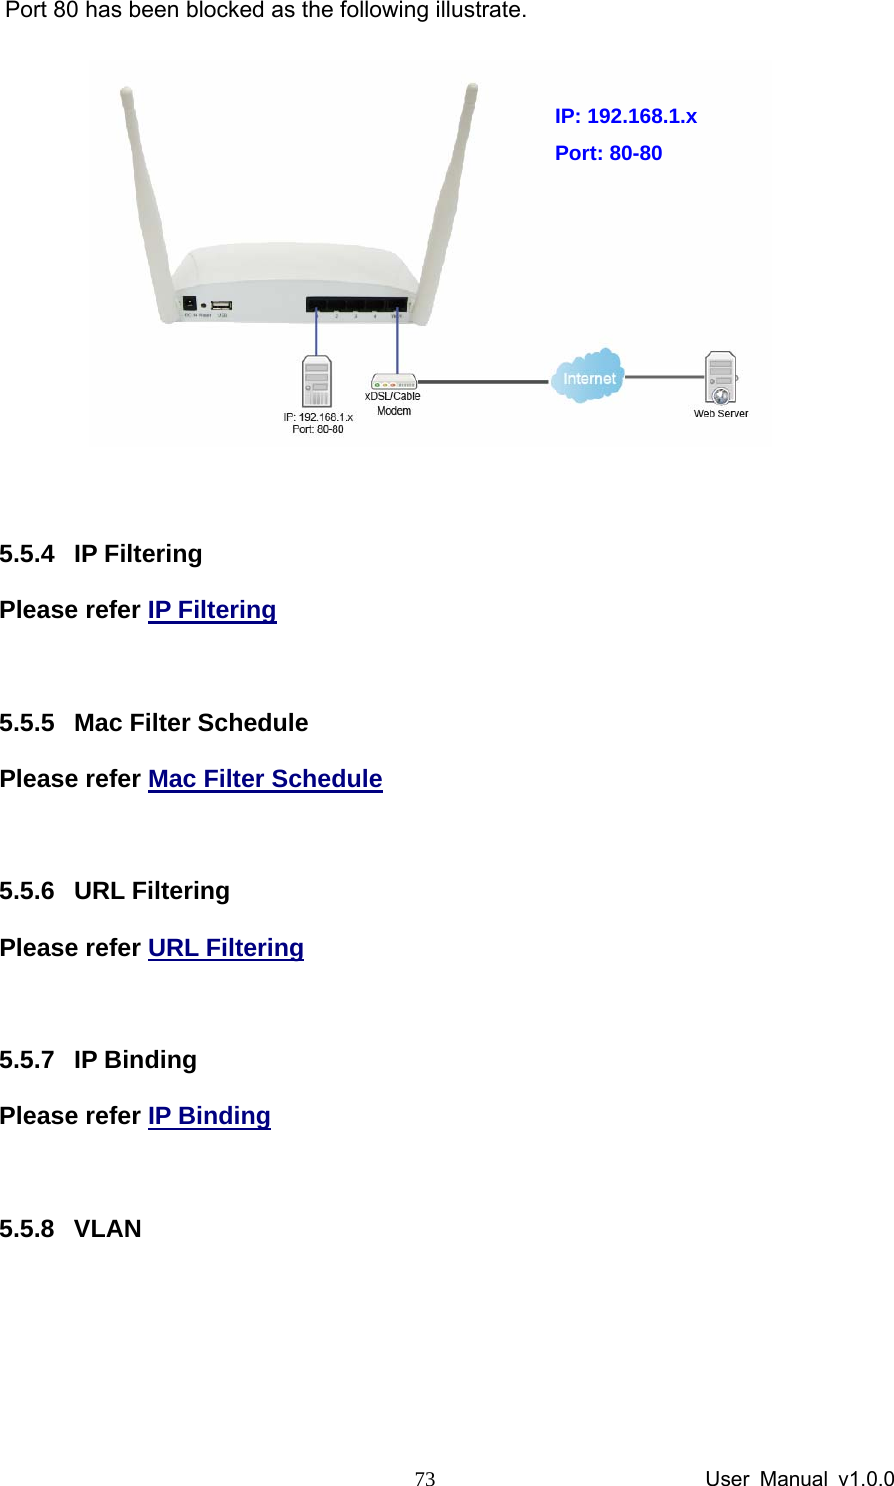                 User Manual v1.0.0 73Port 80 has been blocked as the following illustrate.      5.5.4 IP Filtering Please refer IP Filtering  5.5.5 Mac Filter Schedule Please refer Mac Filter Schedule  5.5.6 URL Filtering Please refer URL Filtering  5.5.7 IP Binding Please refer IP Binding  5.5.8 VLAN IP: 192.168.1.x Port: 80-80 